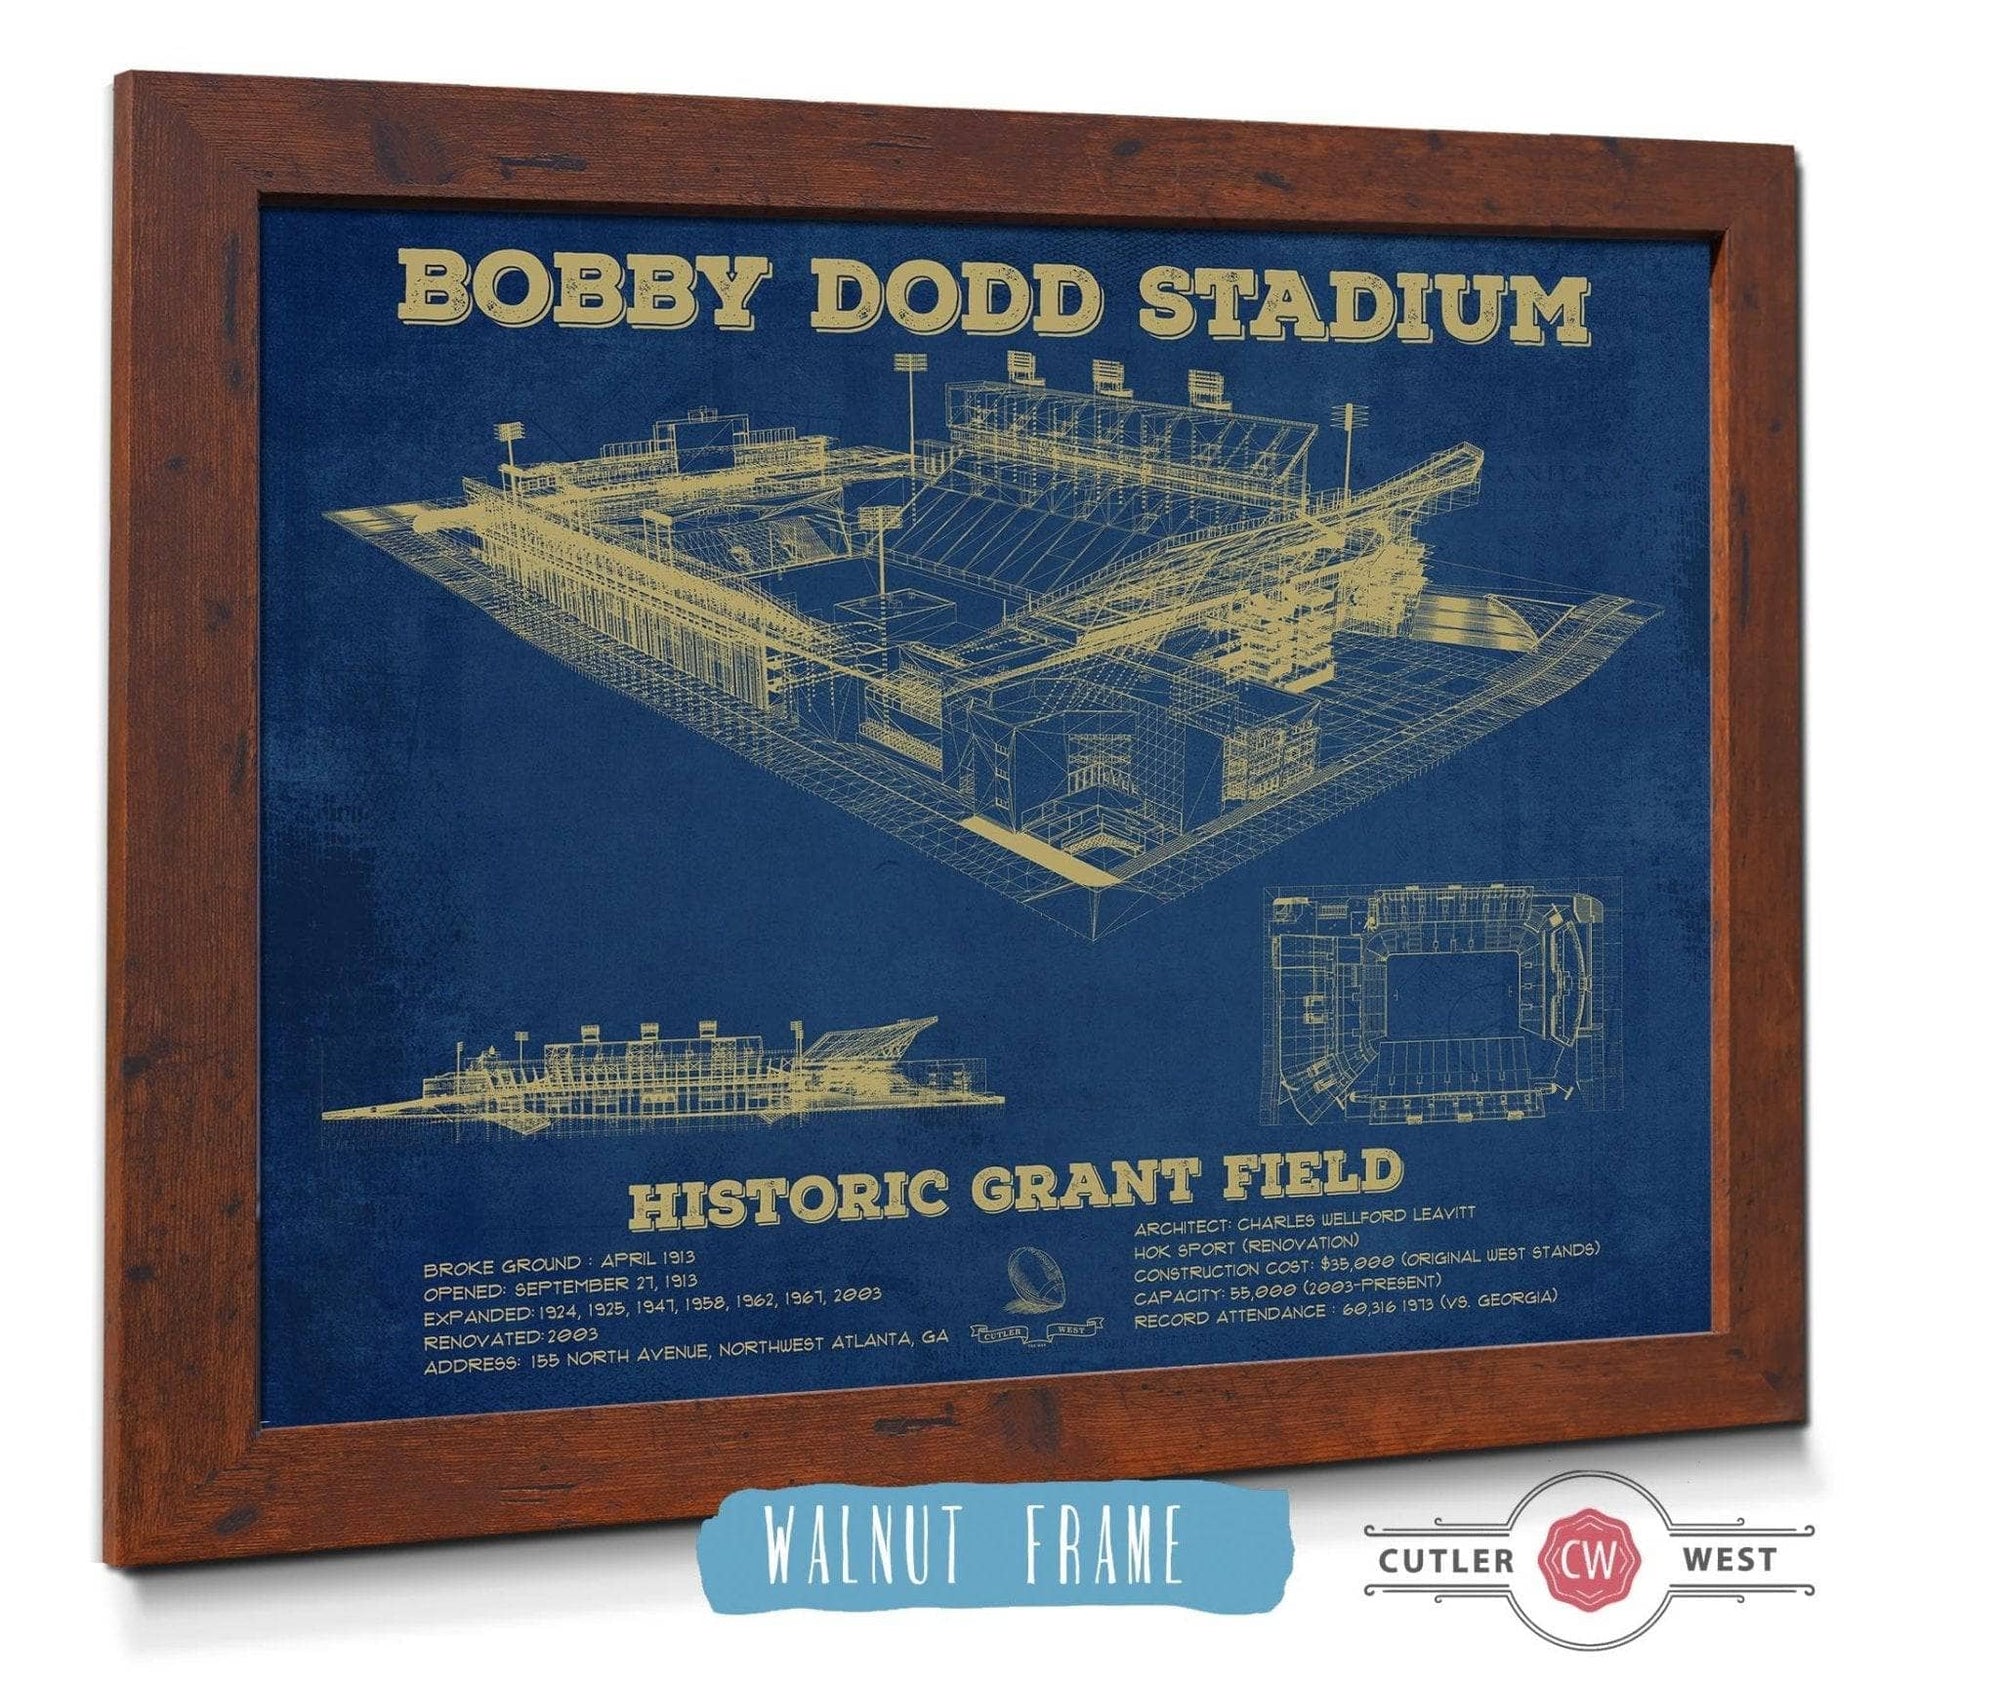 Cutler West College Football Collection 14" x 11" / Walnut Frame Georgia Tech Yellow Jackets - Bobby Dodd Stadium at Historic Grant Field 835000126_48674